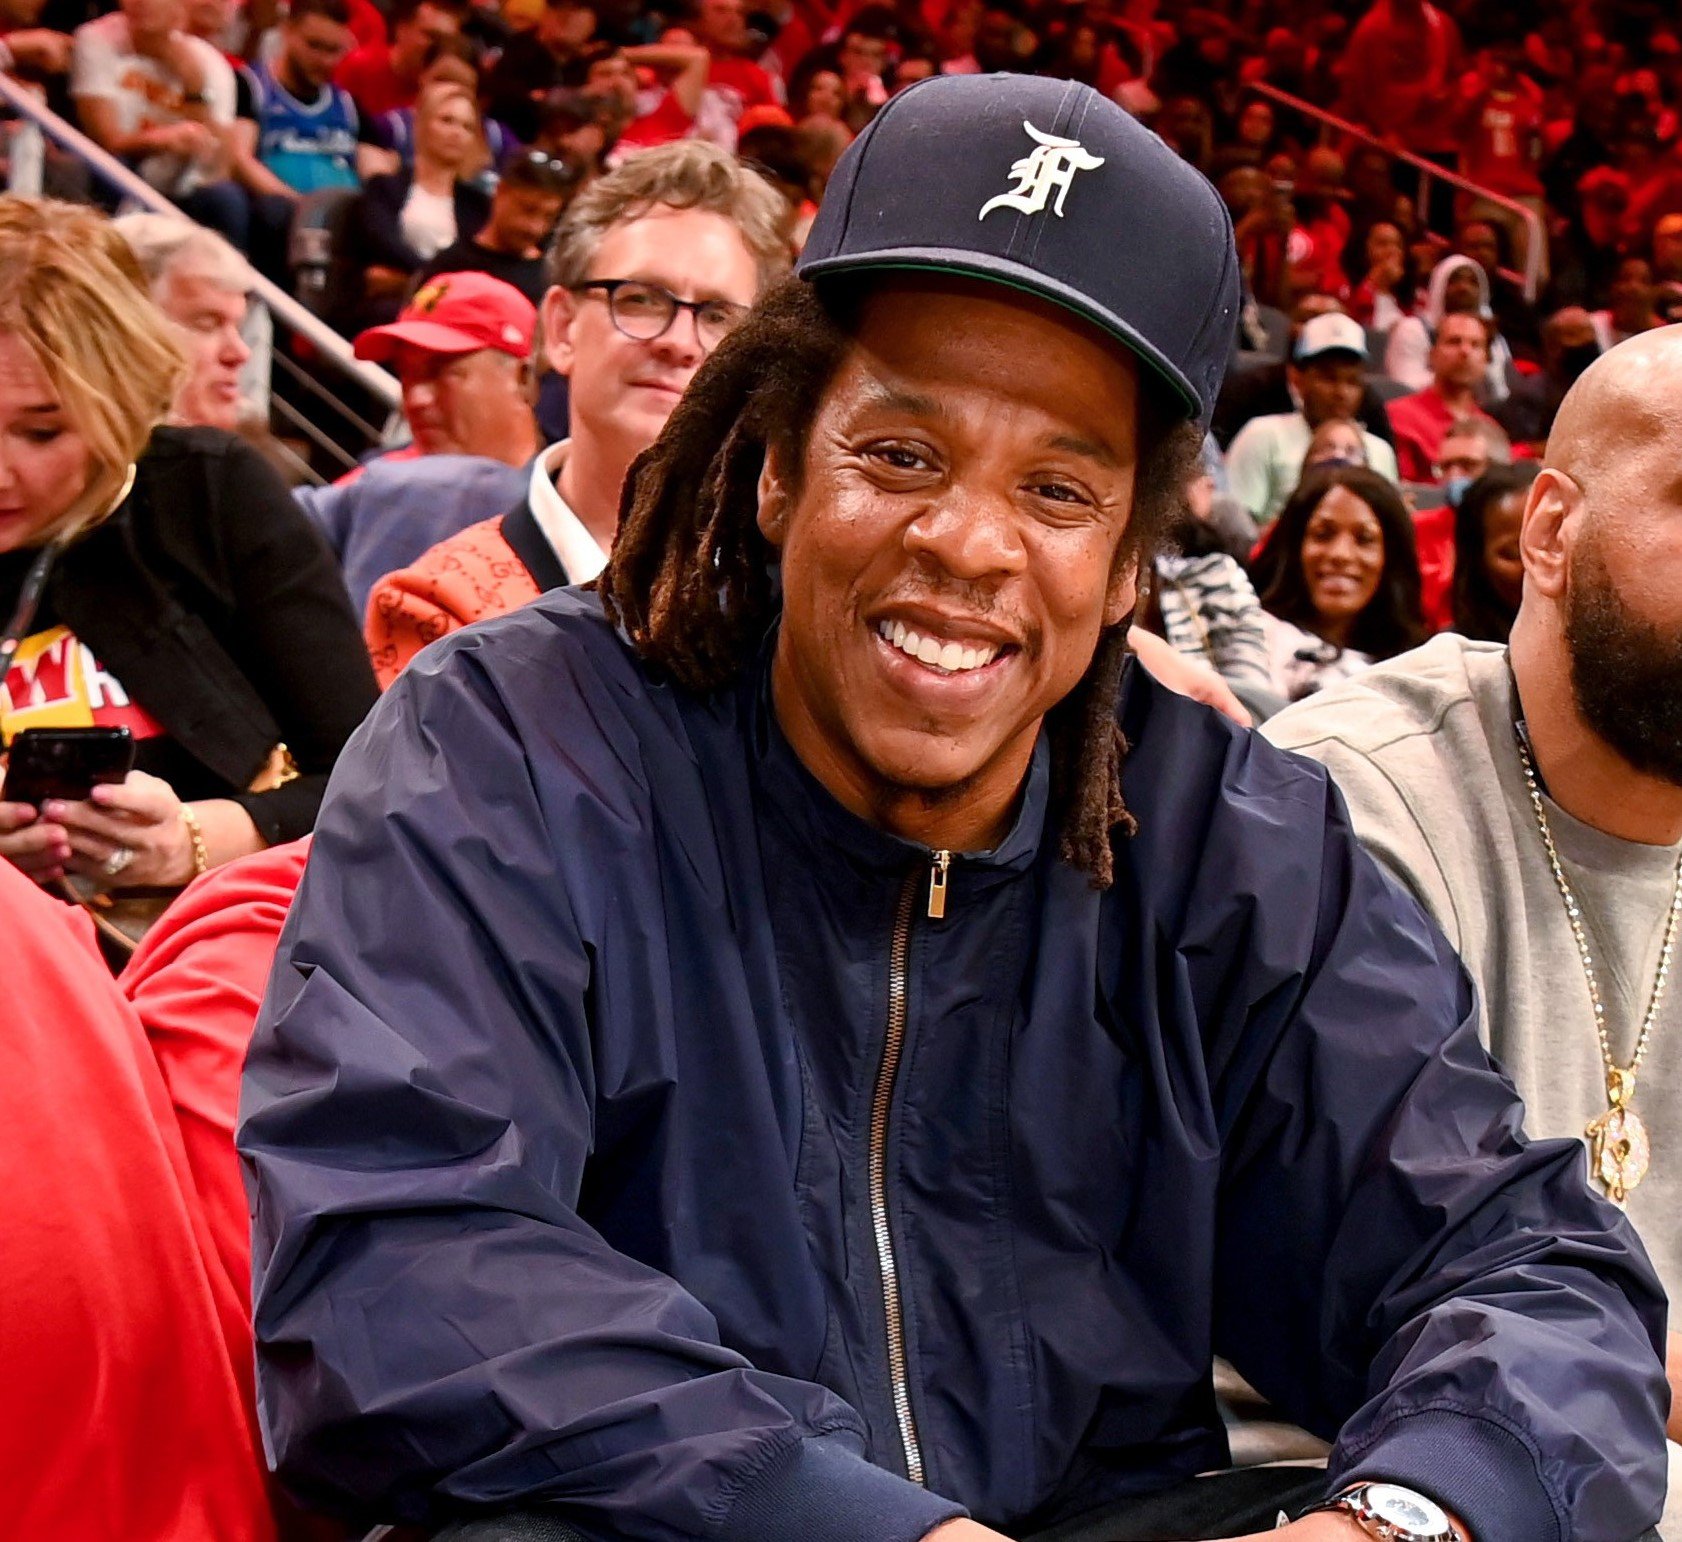 Jay-Z, who is not on social media, smiling at an NBA game between the Charlotte Hornets and Atlanta Hawks